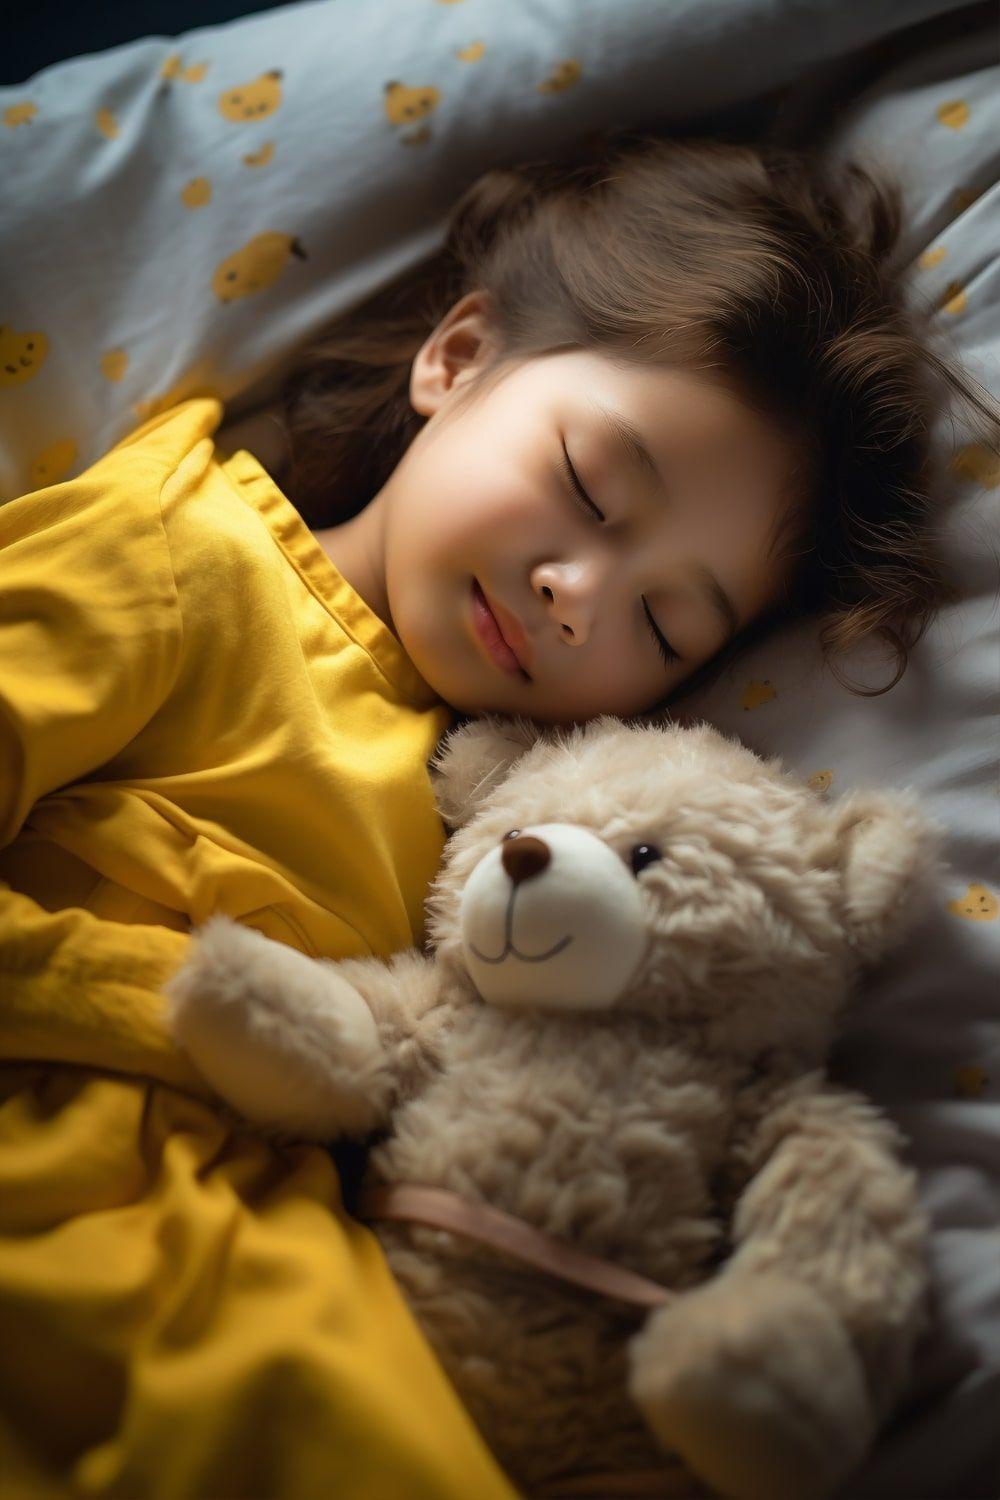 Sweet Dreams, Sound Health: Know the Art of Sleep Hygiene for a Restful Night